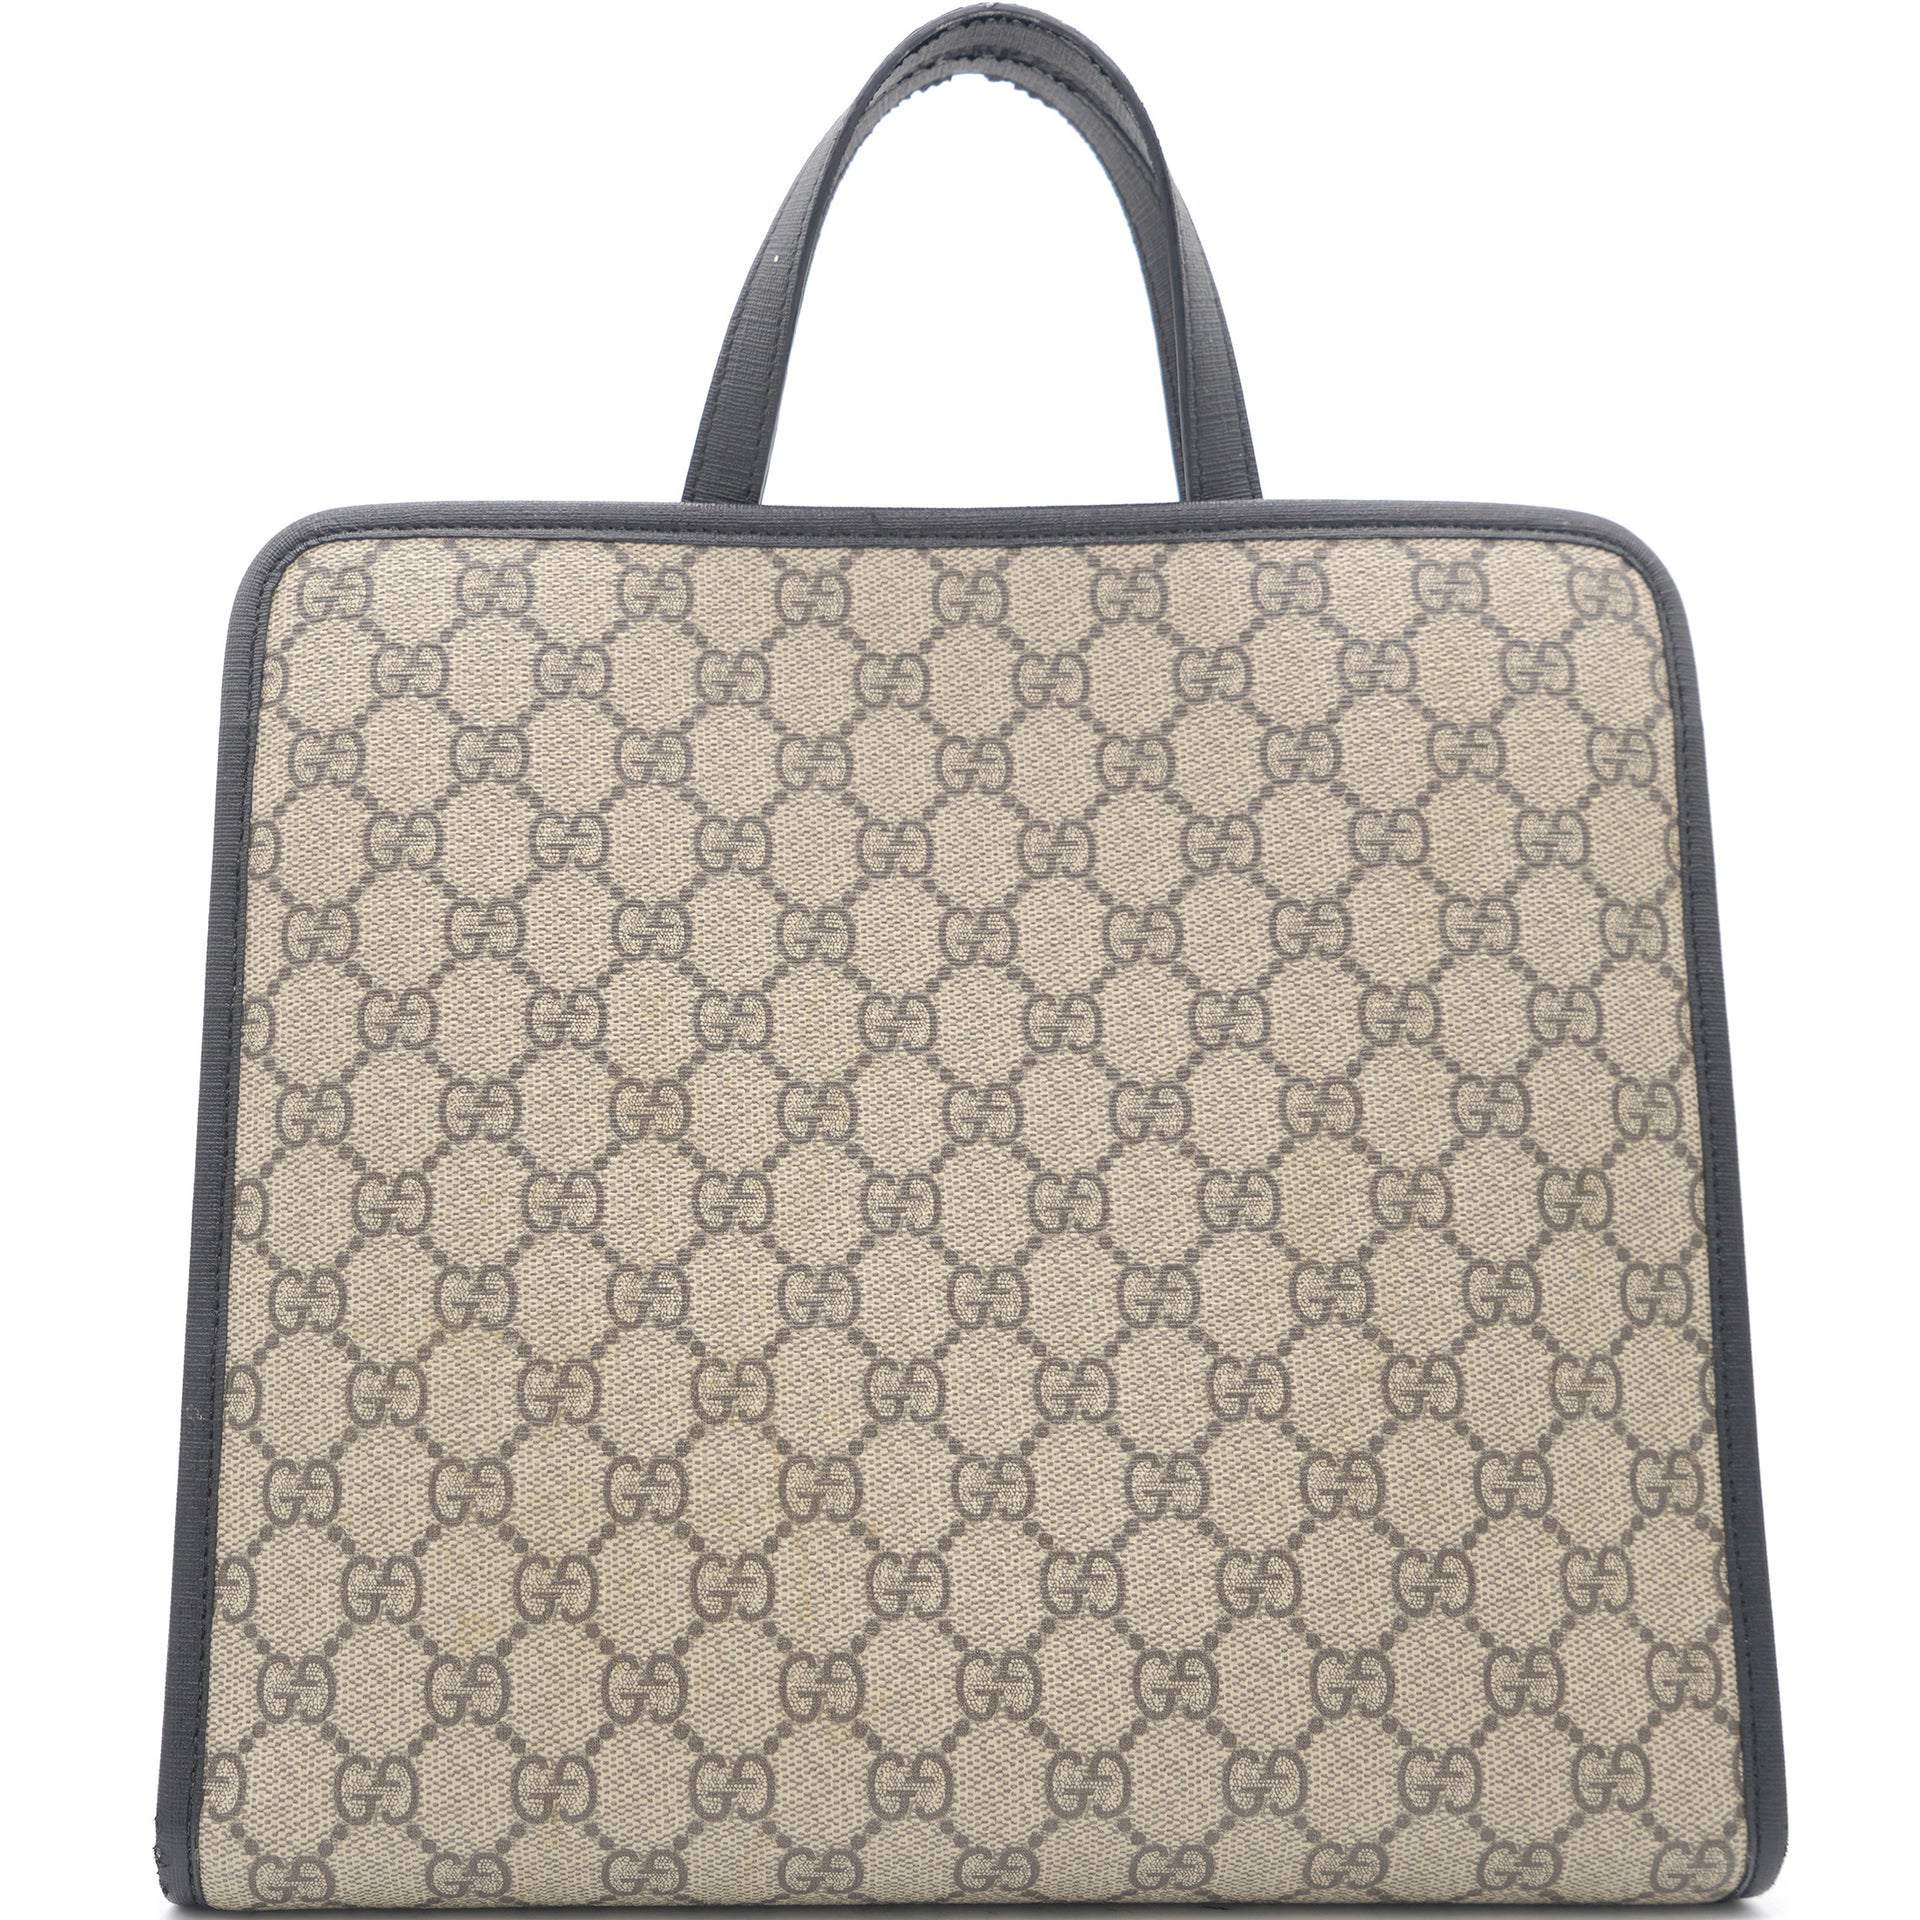 Gucci Children's tote bag with apple – STYLISHTOP